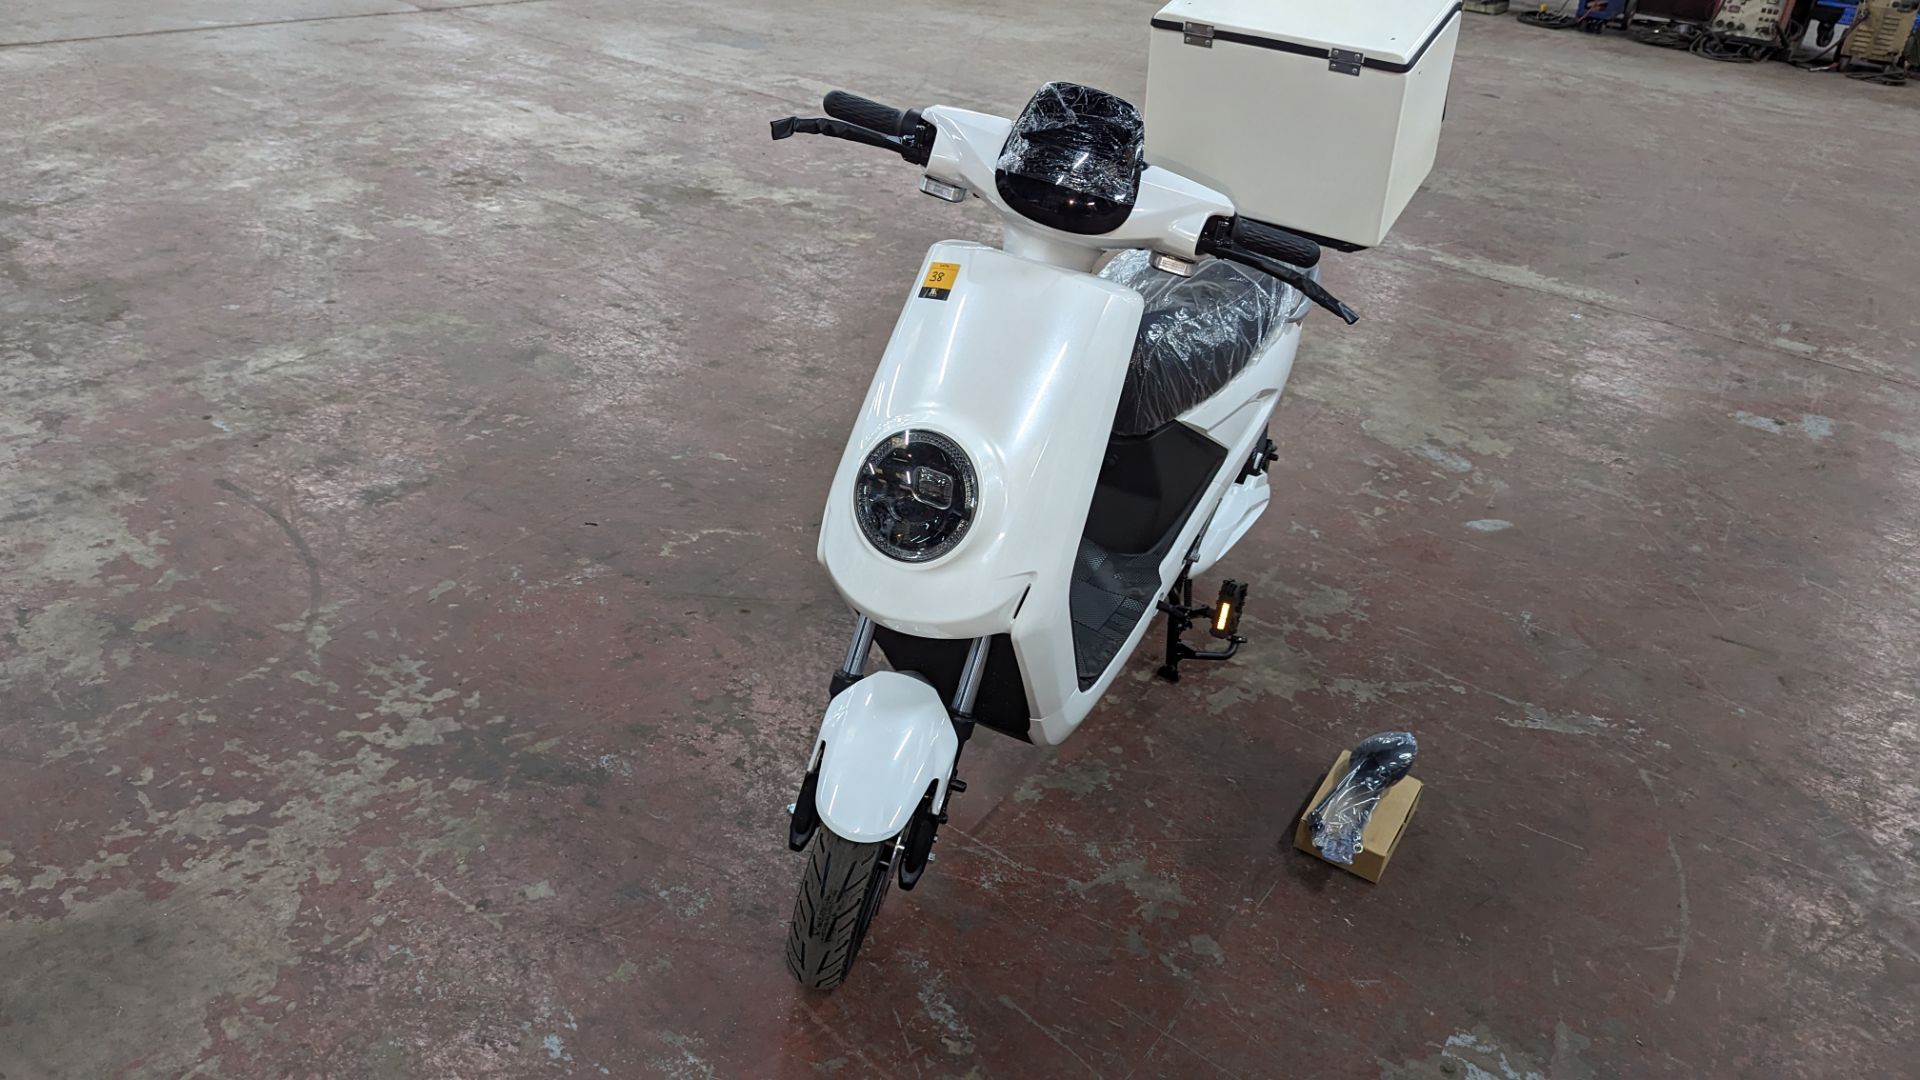 Model 18 Electric Bike: Zero (0) recorded miles, white body with black detailing, insulated box moun - Image 9 of 14